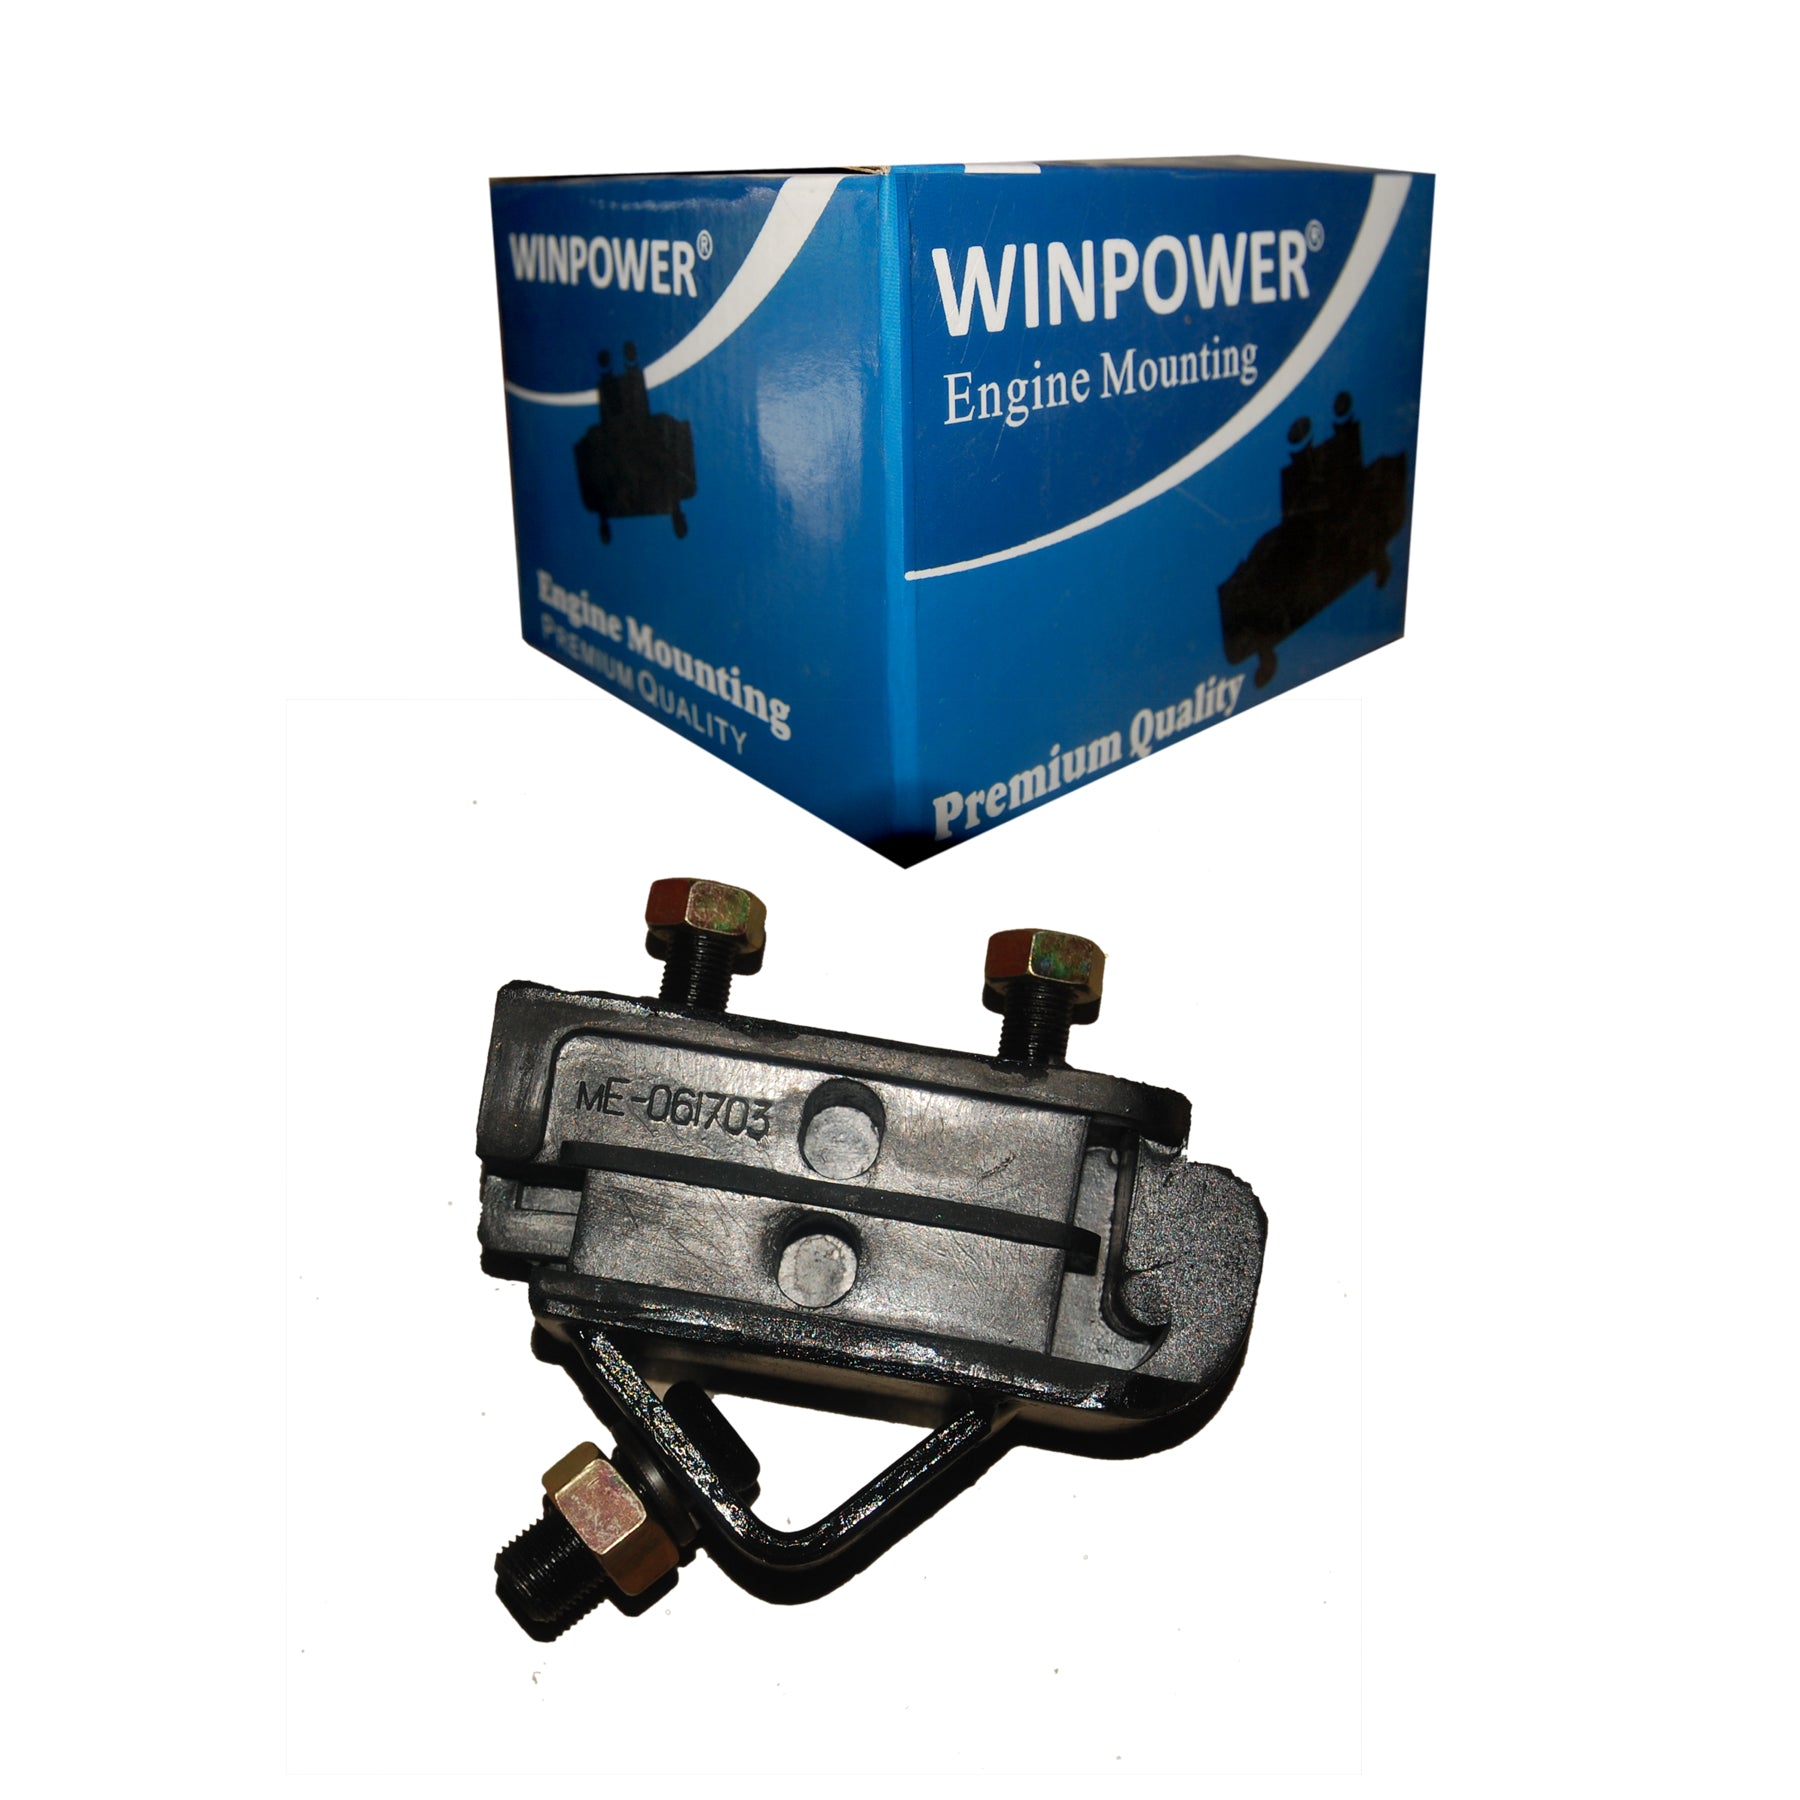 Engine Mounting, WINPOWER, ME061703 (005820) - Win Store